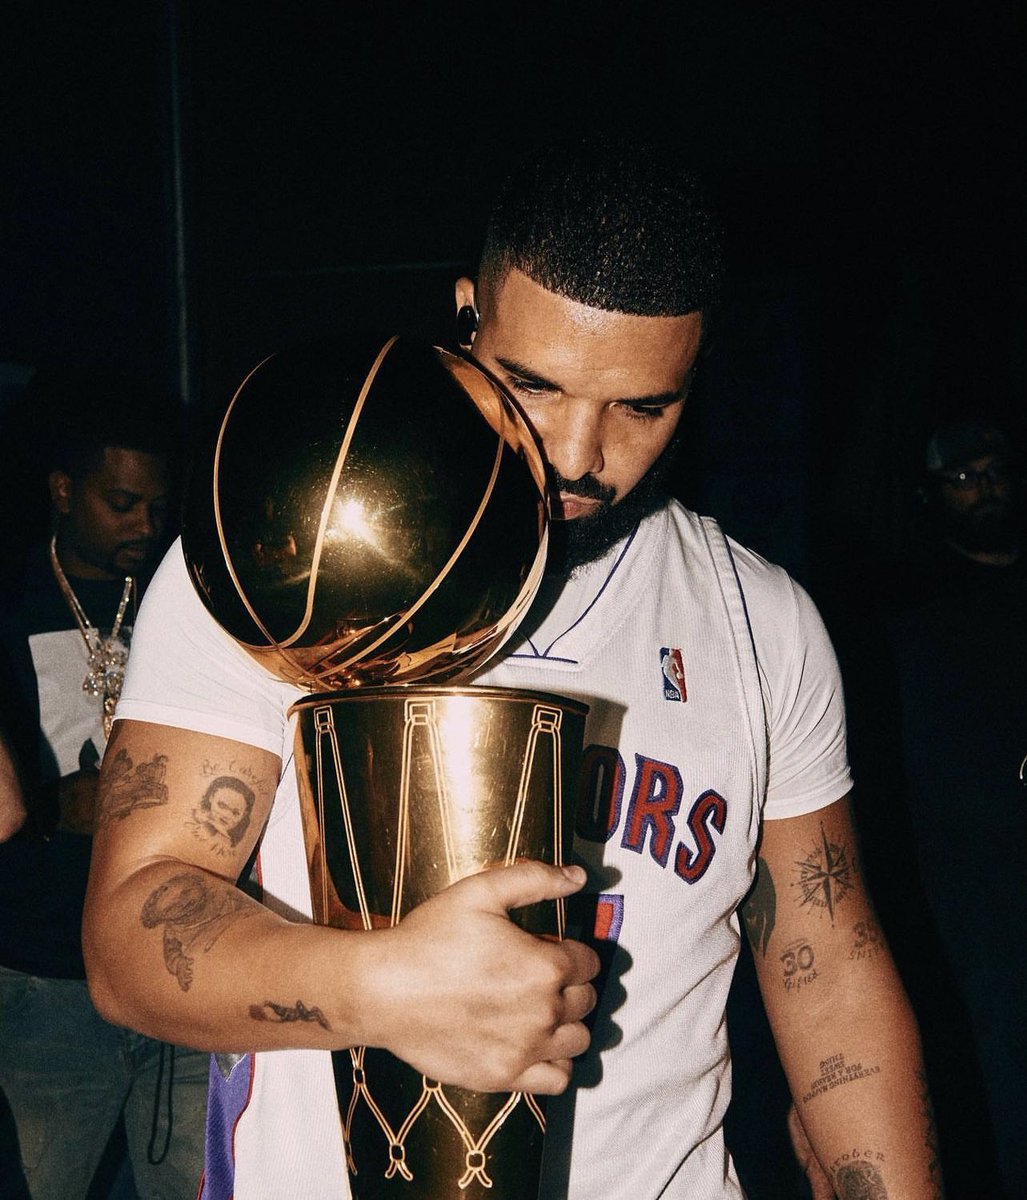 Drake has now surpassed 97 BILLION streams on Spotify 🔥🏆 He is the most streamed artist of all time with more than DOUBLE the streams of the next closest rapper.